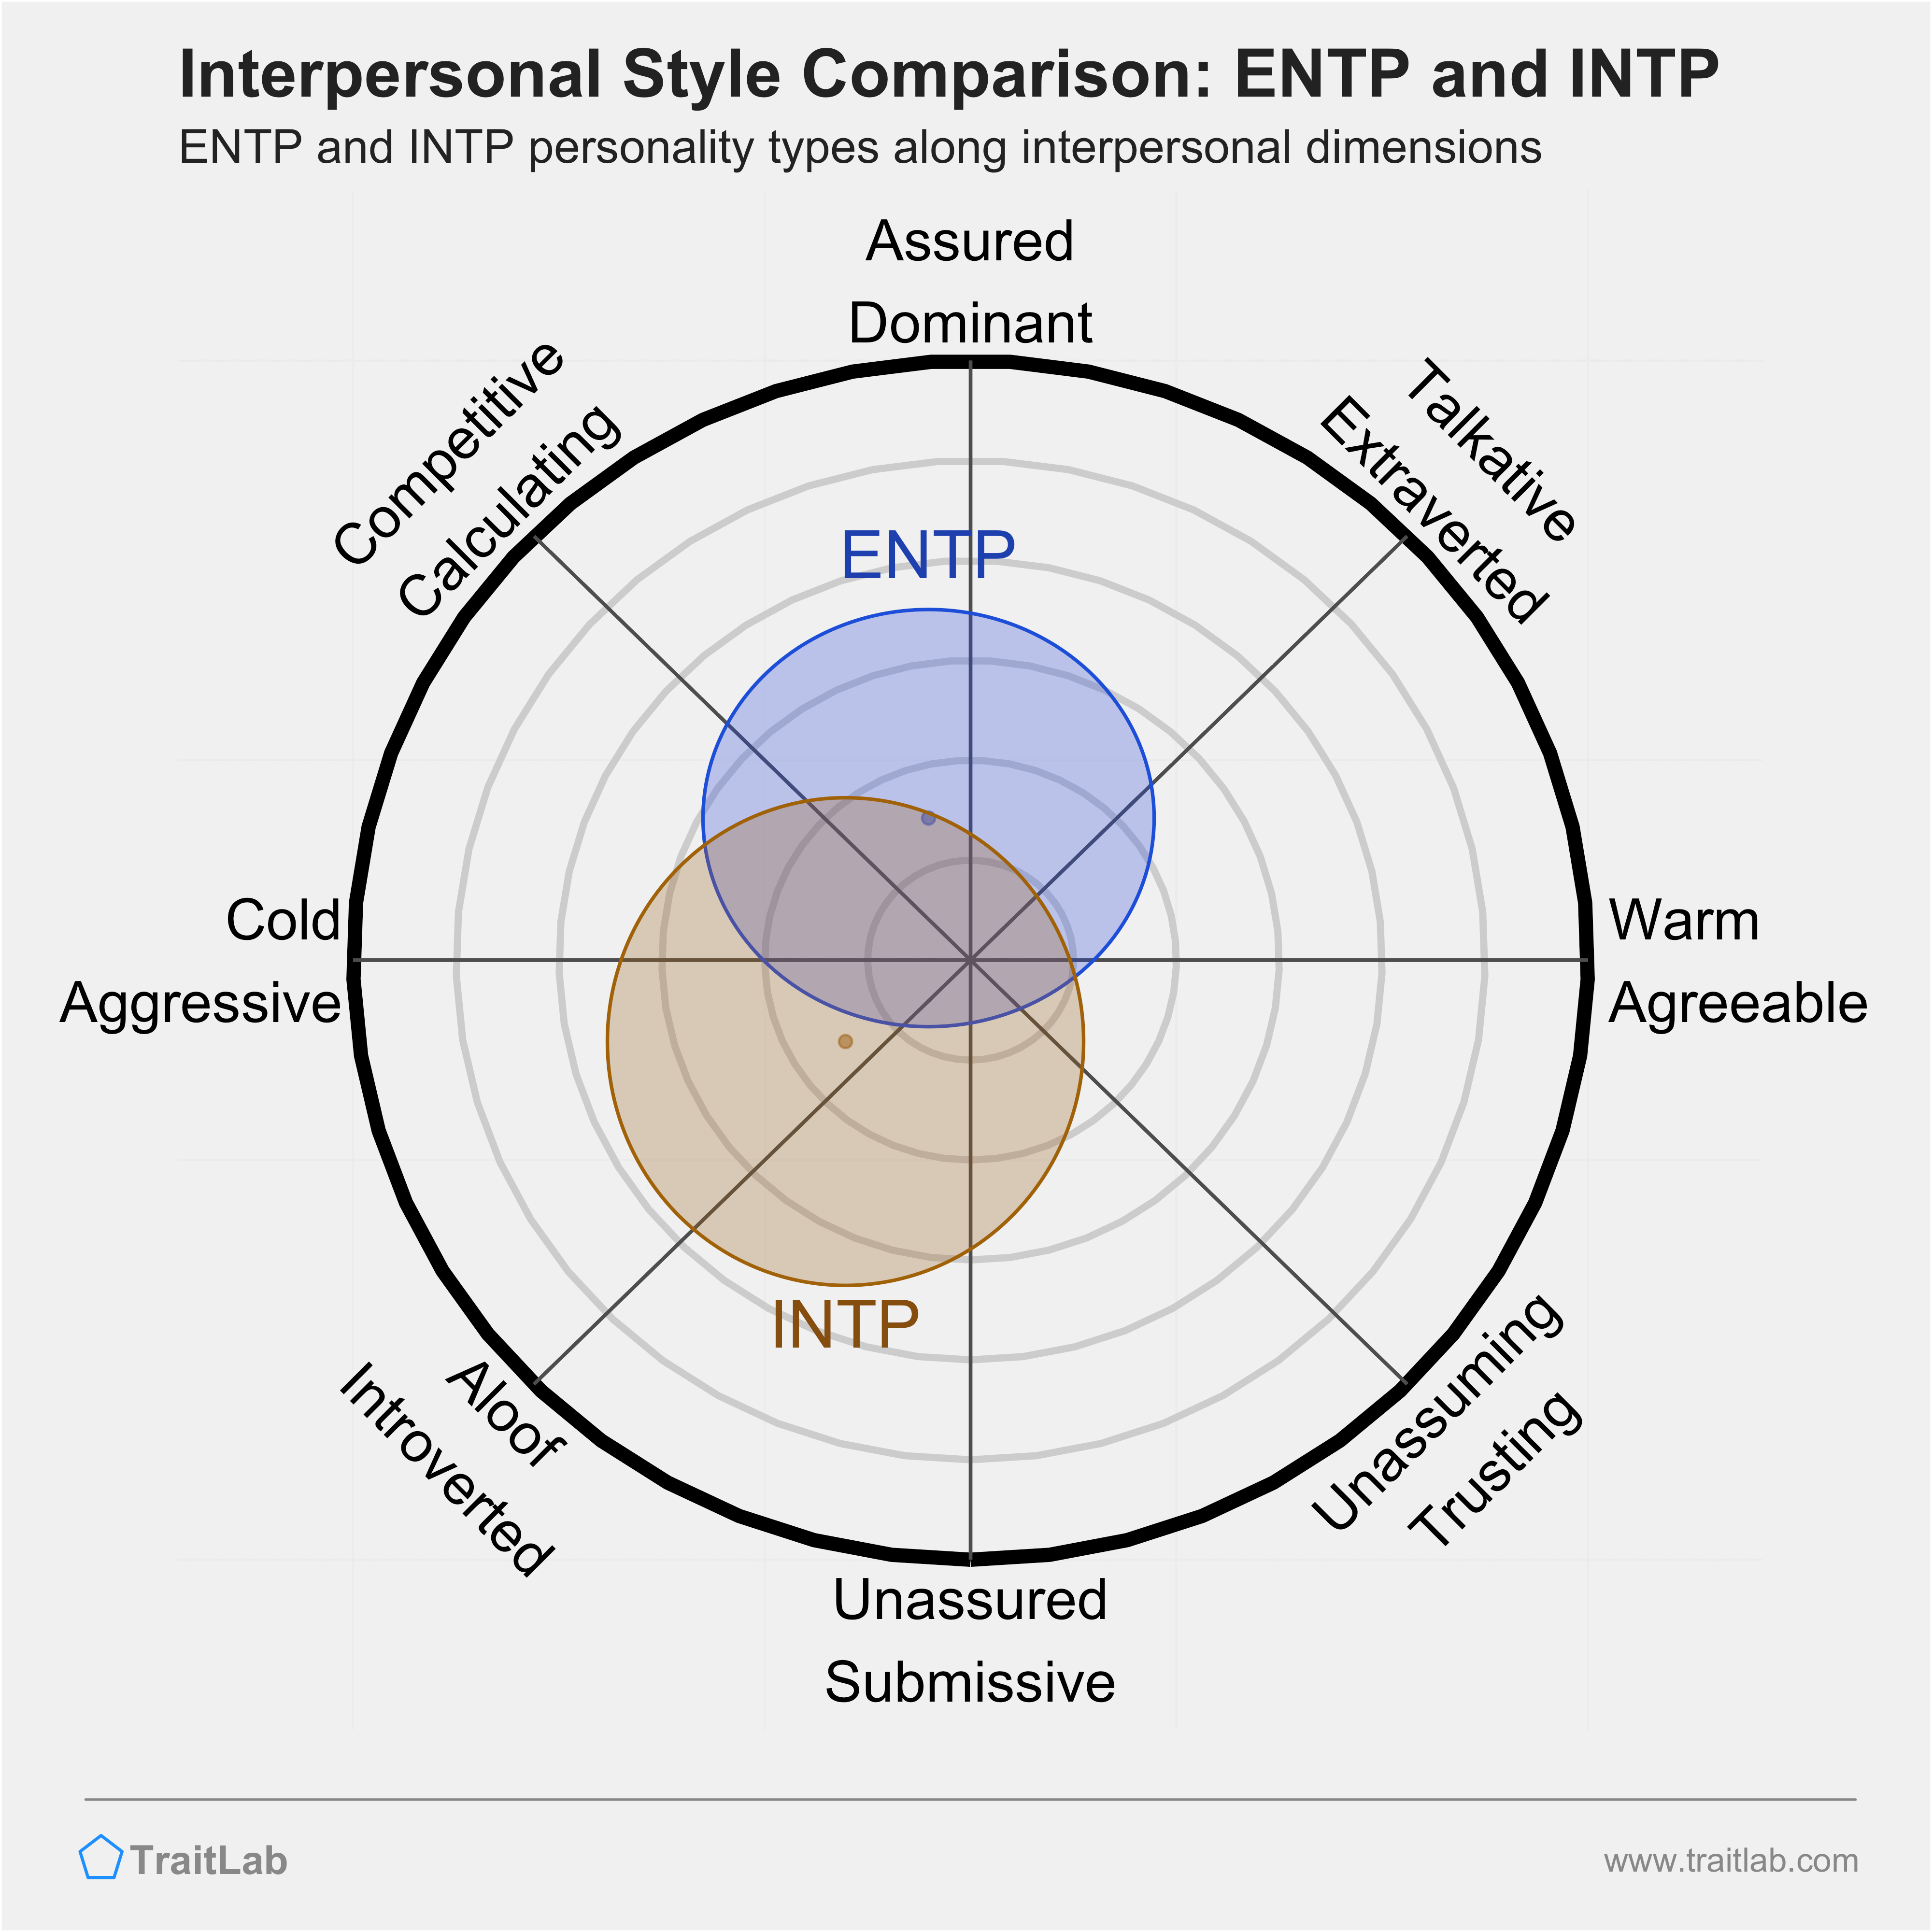 ENTP and INTP comparison across interpersonal dimensions